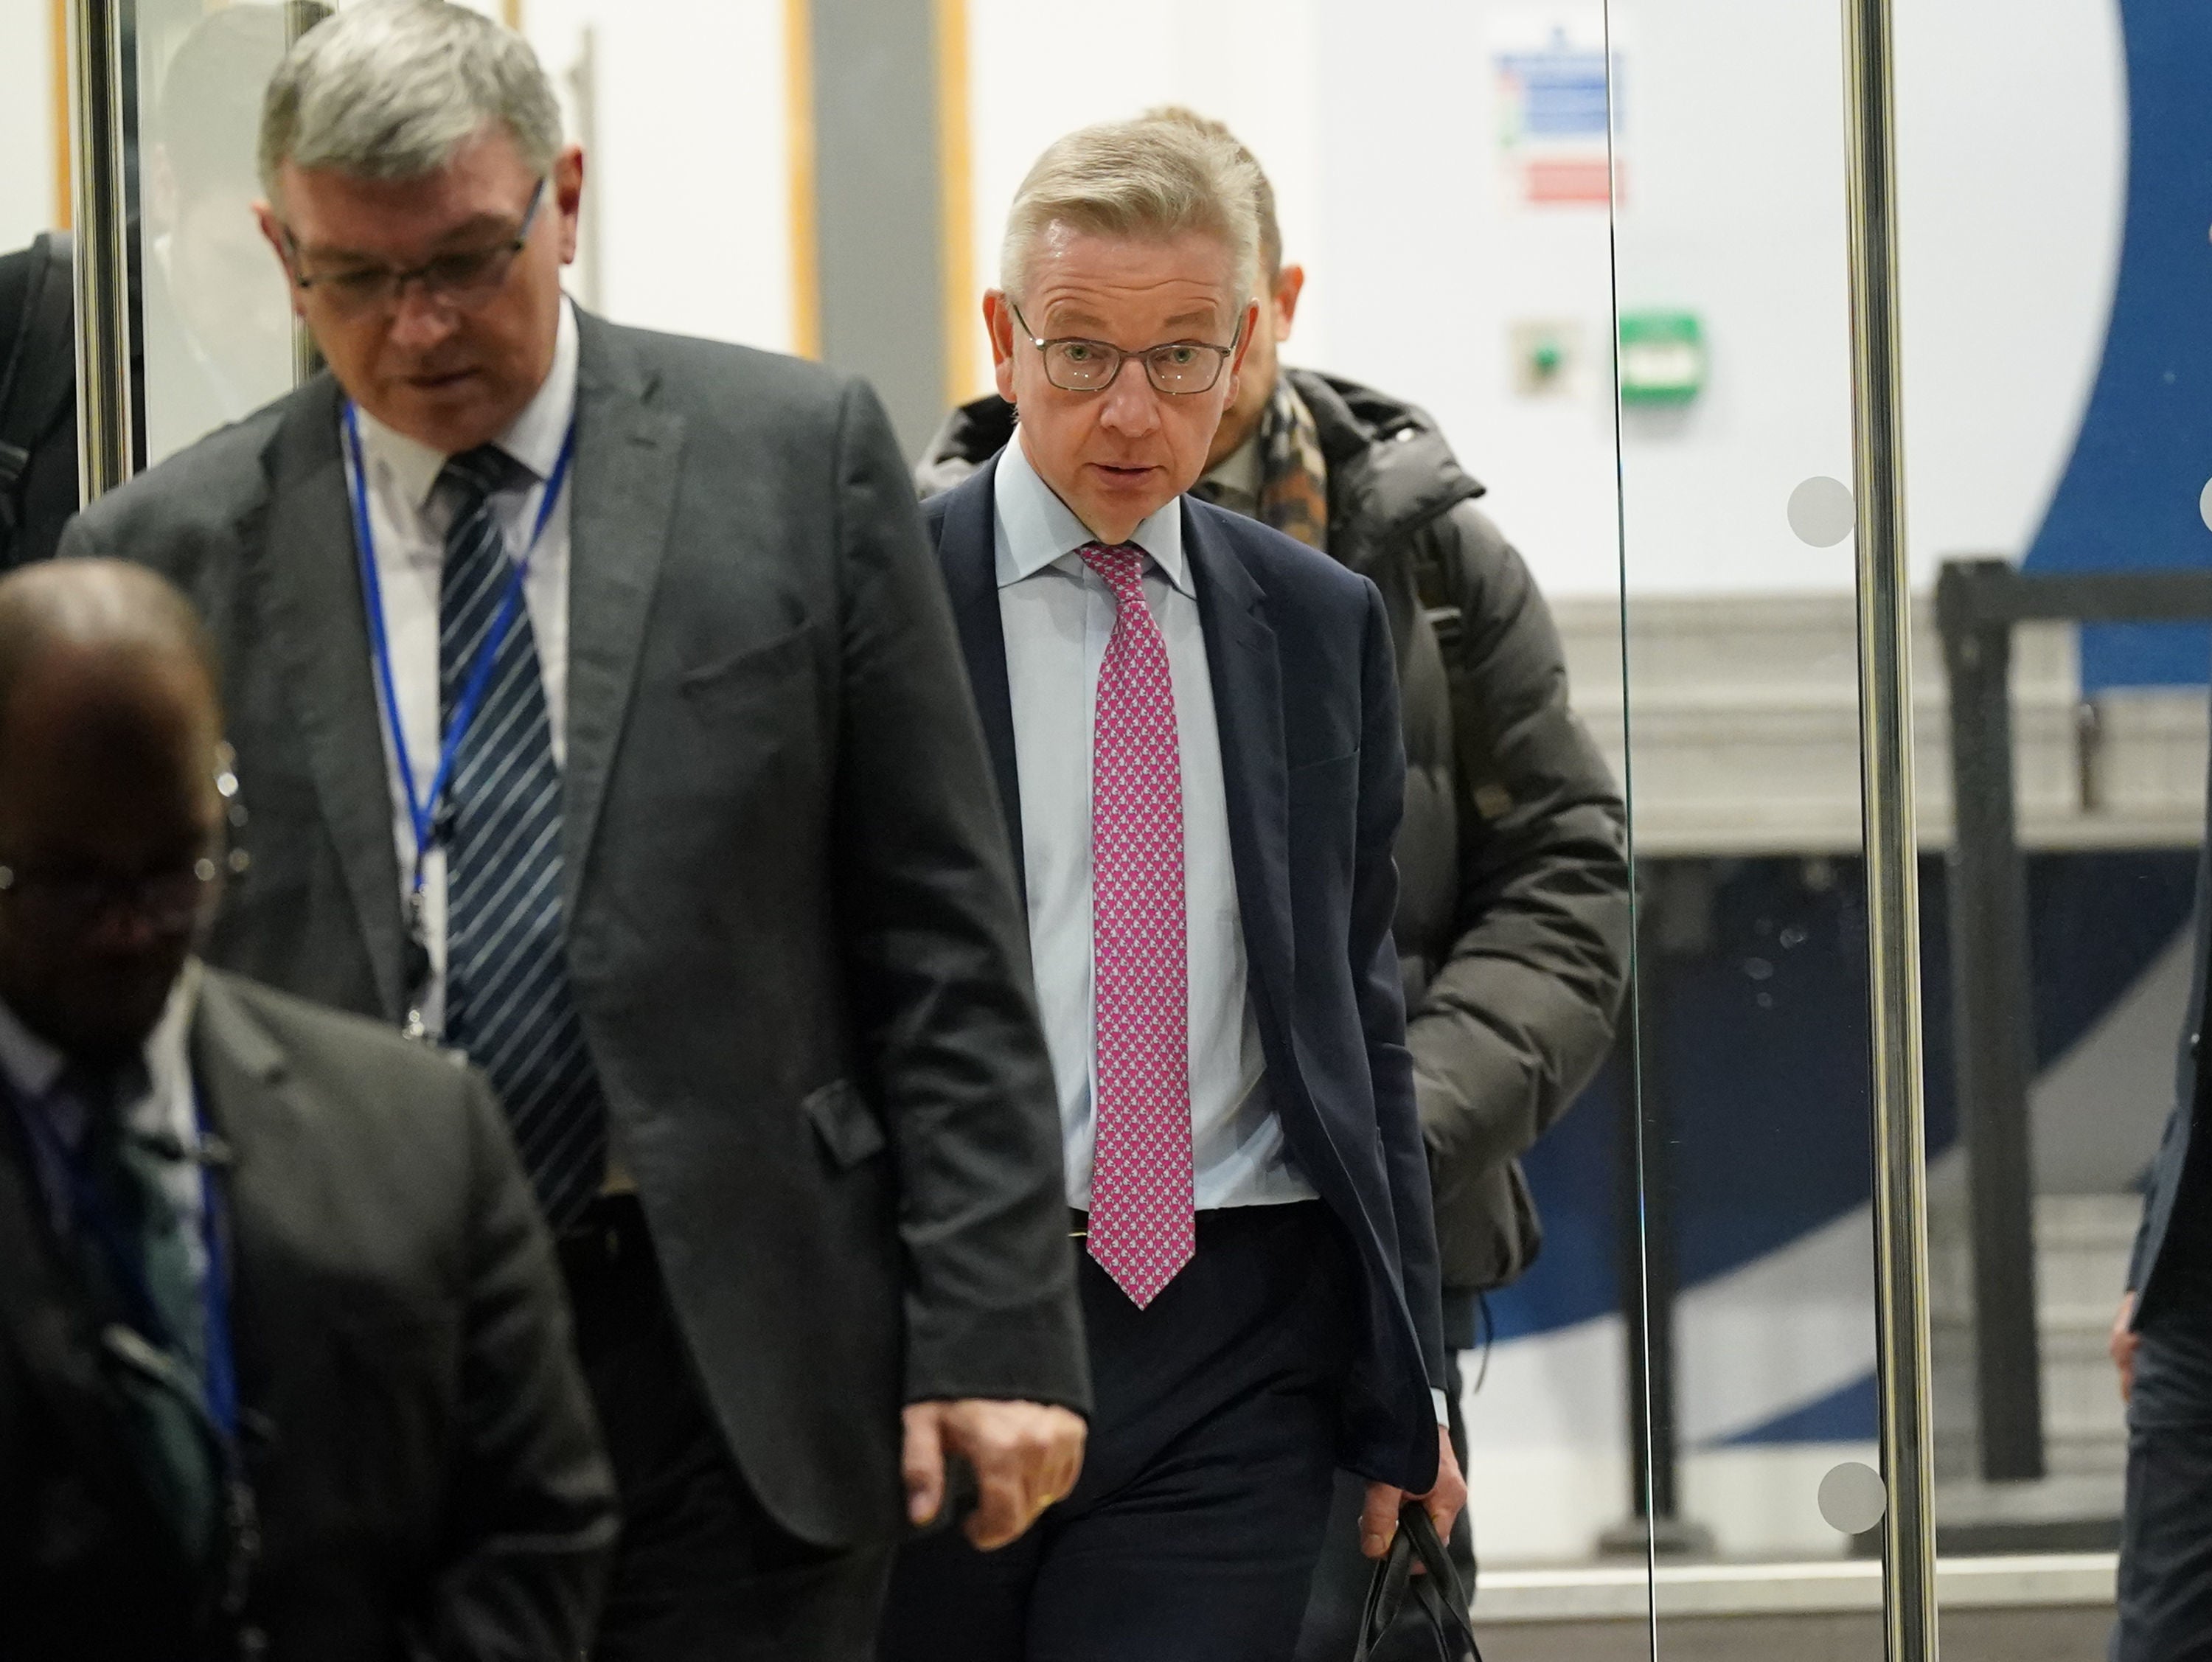 Gove leaving the Covid inquiry after an explosive hearing